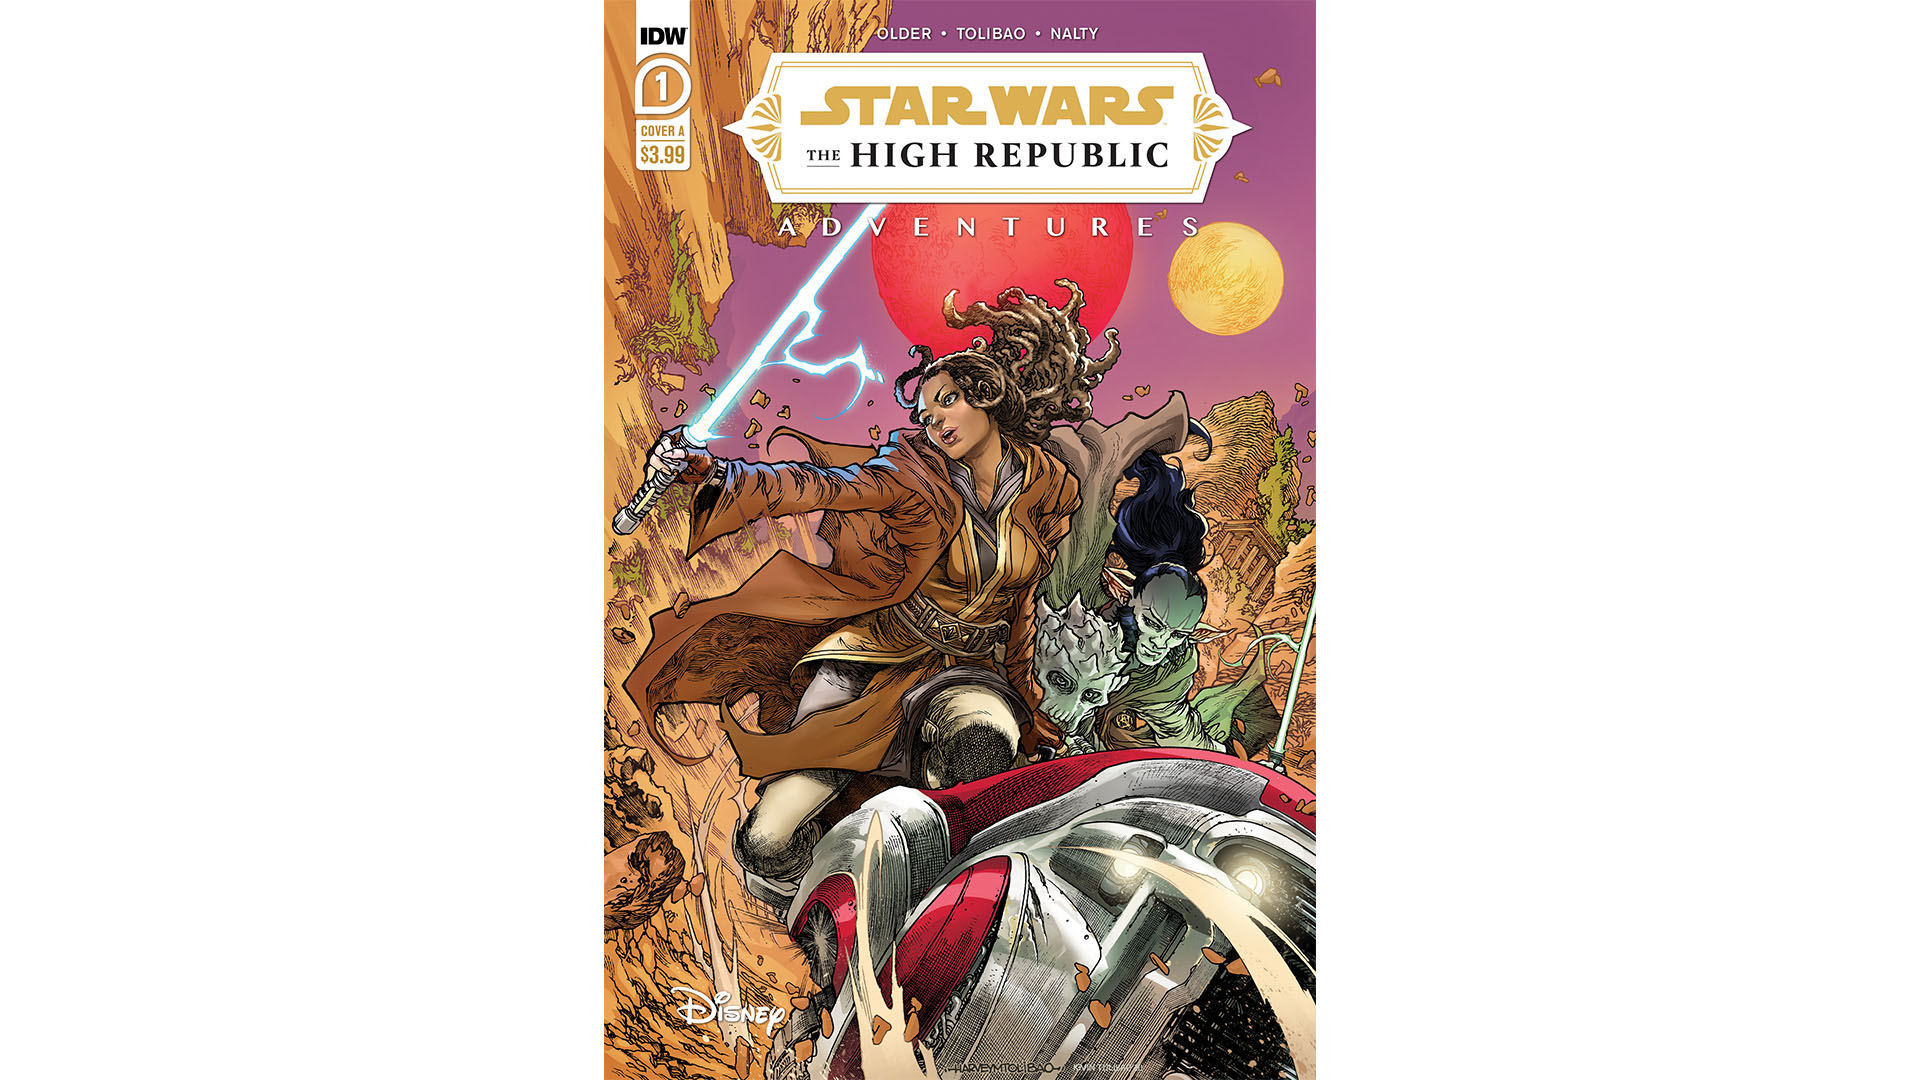 The cover of IDW Publishing's Star Wars: The High Republic Adventures written by Daniel Jose Older and illustrated by Harvey Tolibao